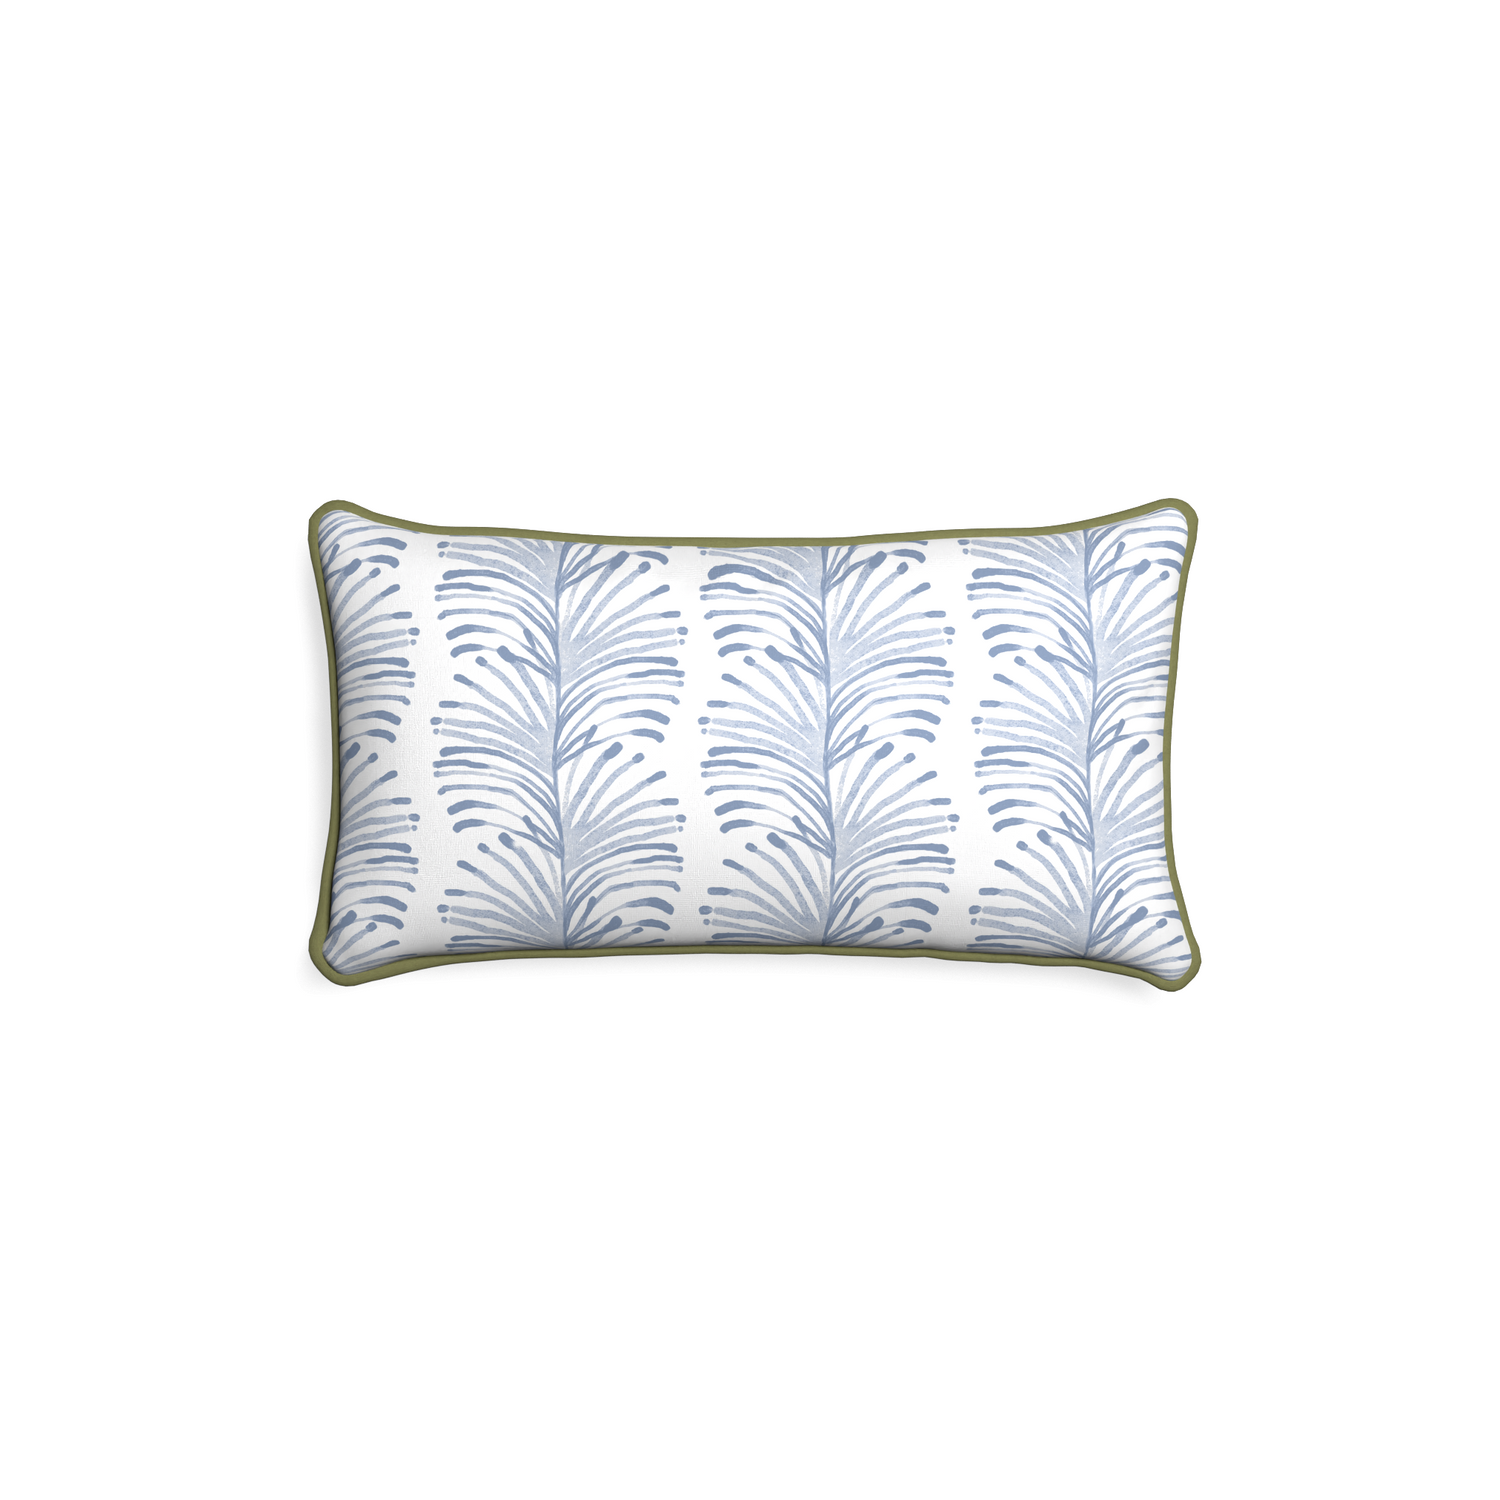 rectangle sky blue colored botanical stripe pillow with moss green piping